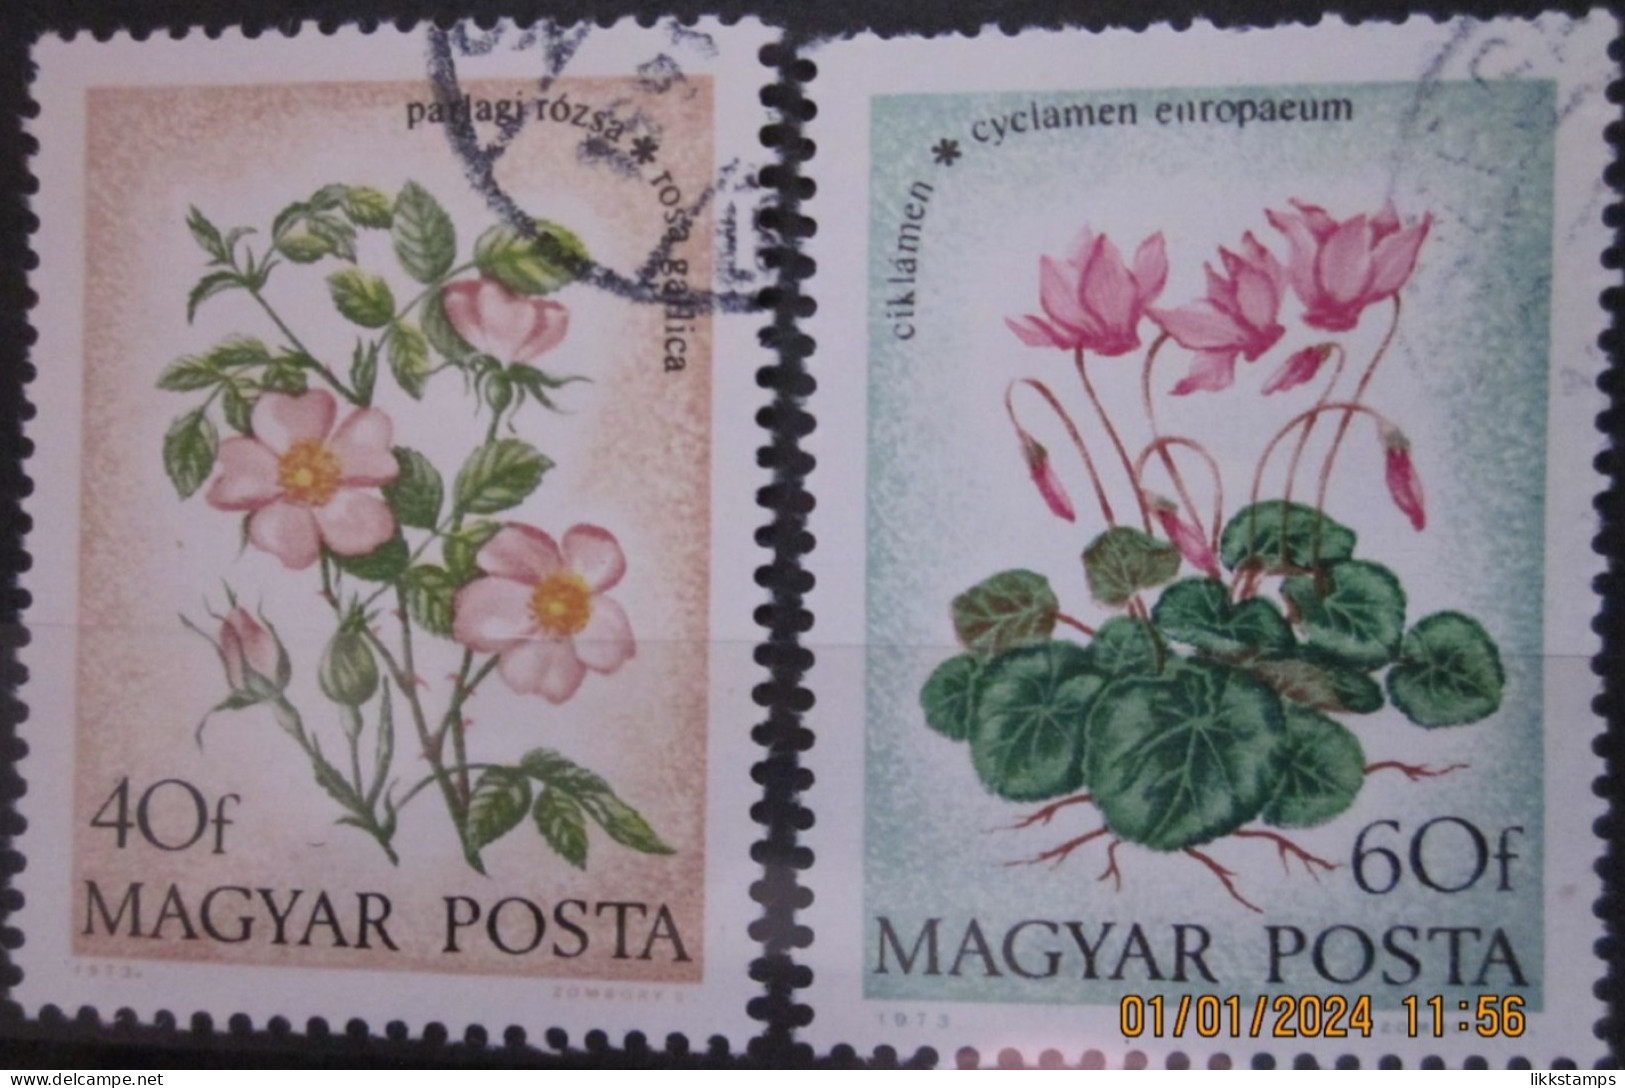 HUNGARY ~ 1973 ~ S.G. NUMBER 2820 - 2821 ~ WILD FLOWERS. ~ VFU #01564 - Used Stamps